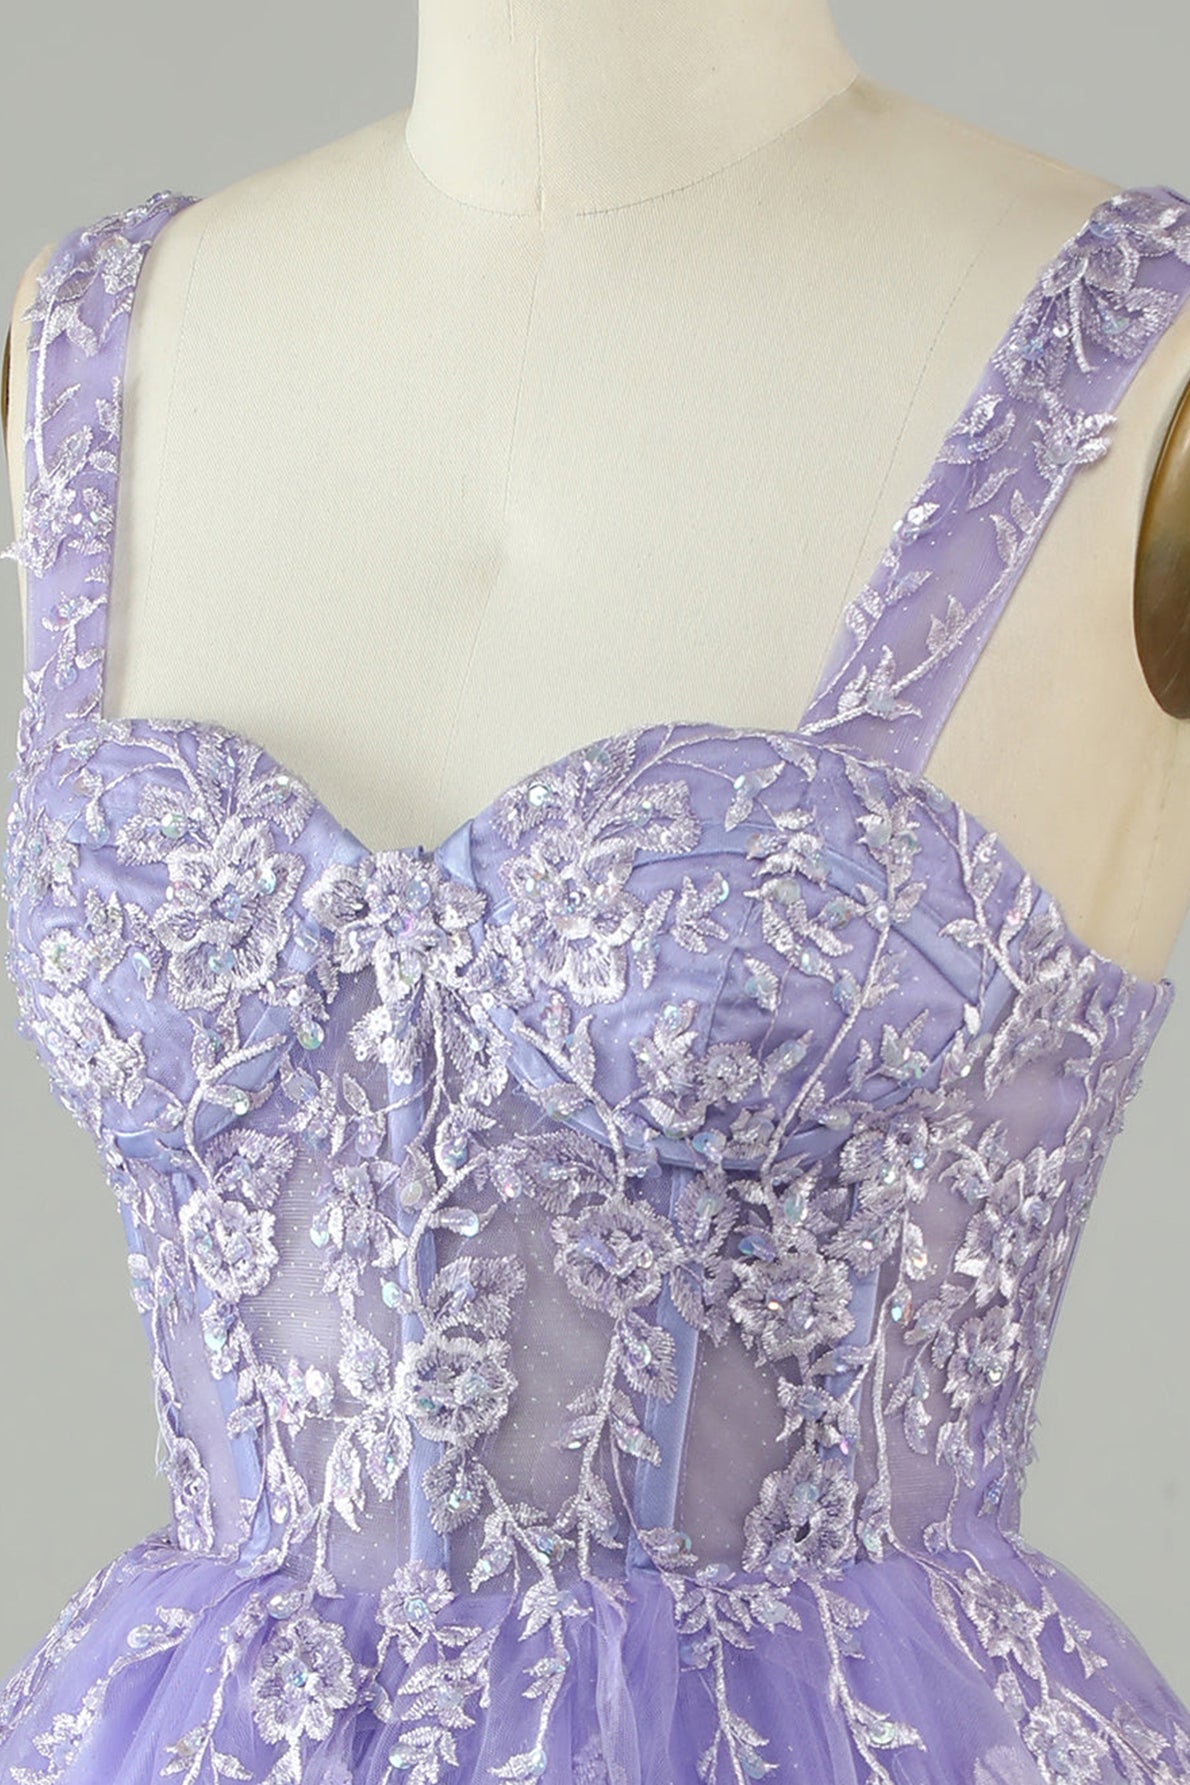 Lavender Sweetheart Tulle Appliques A-line Homecoming Dress